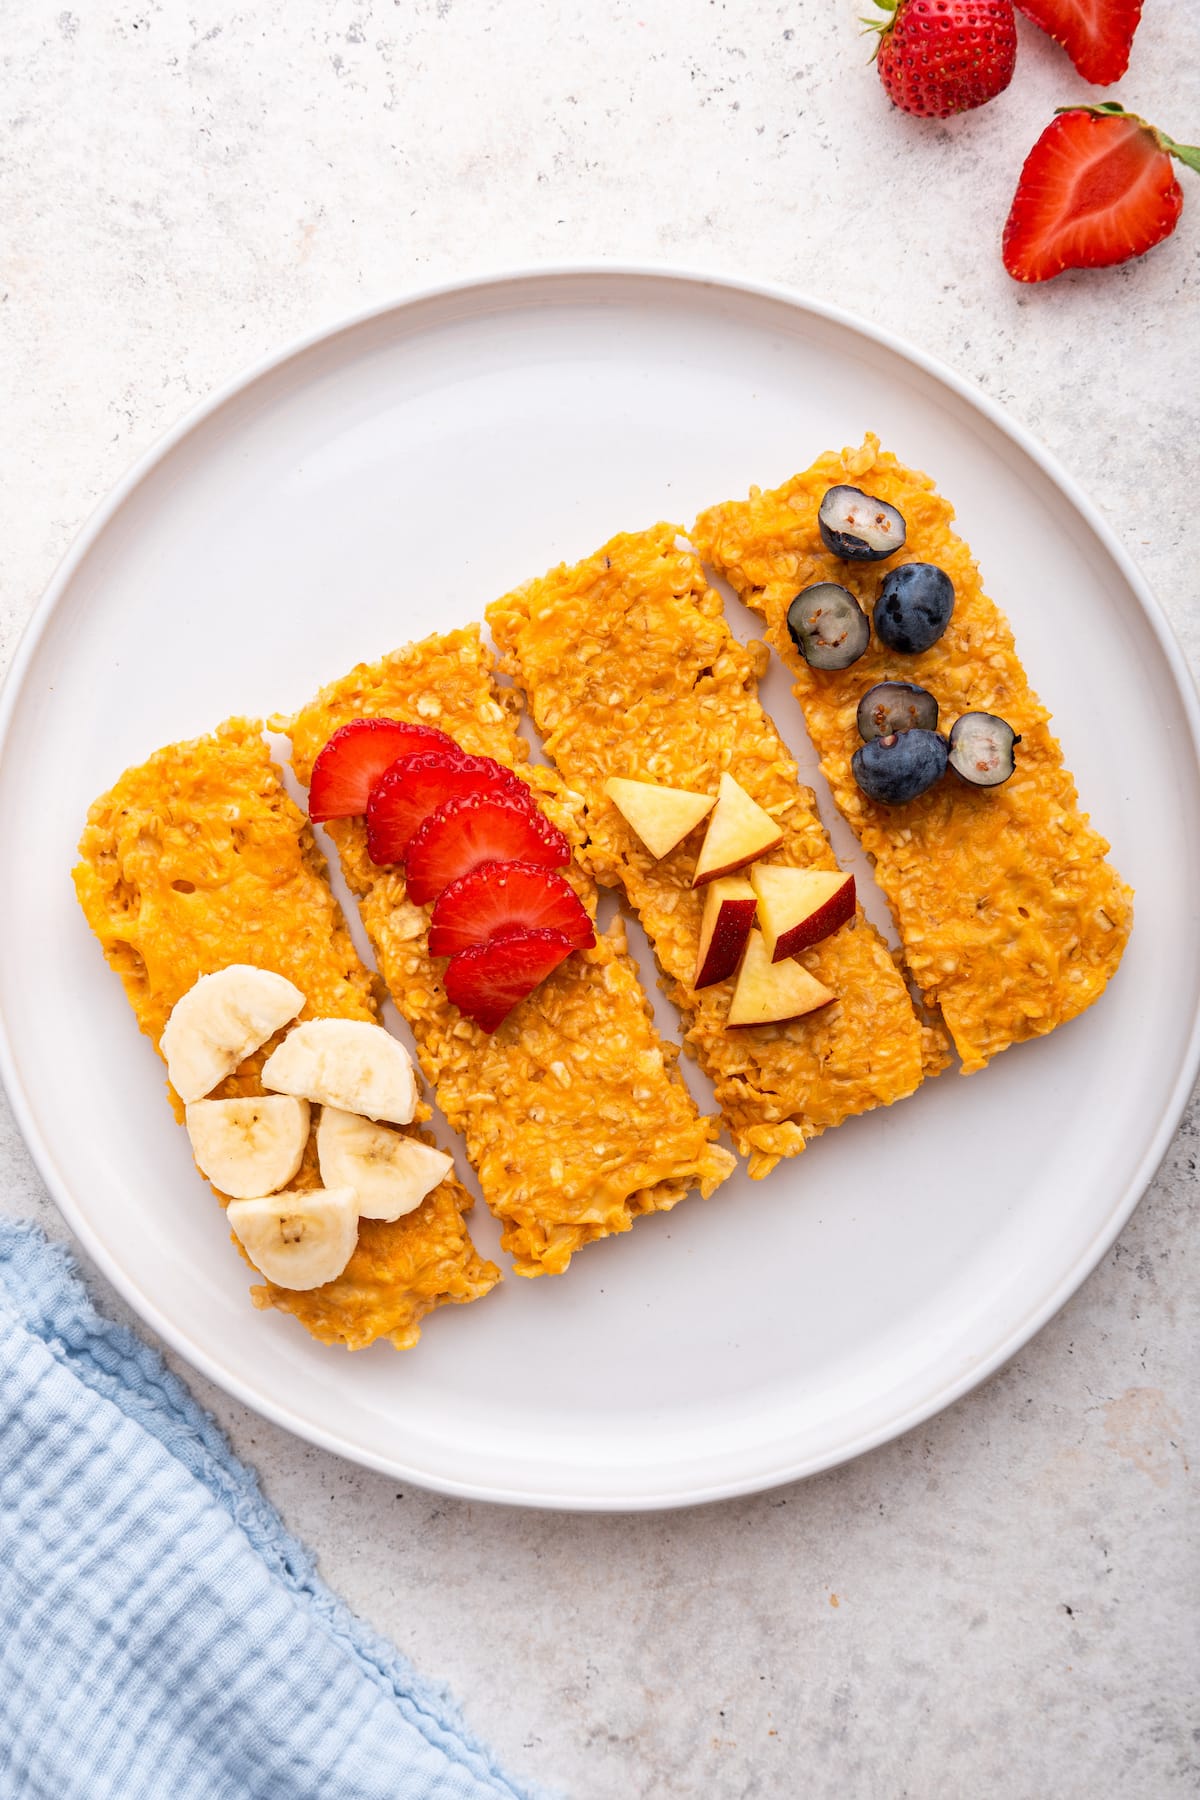 Four sweet potato oatmeal fingers on a plate topped with fresh fruit.